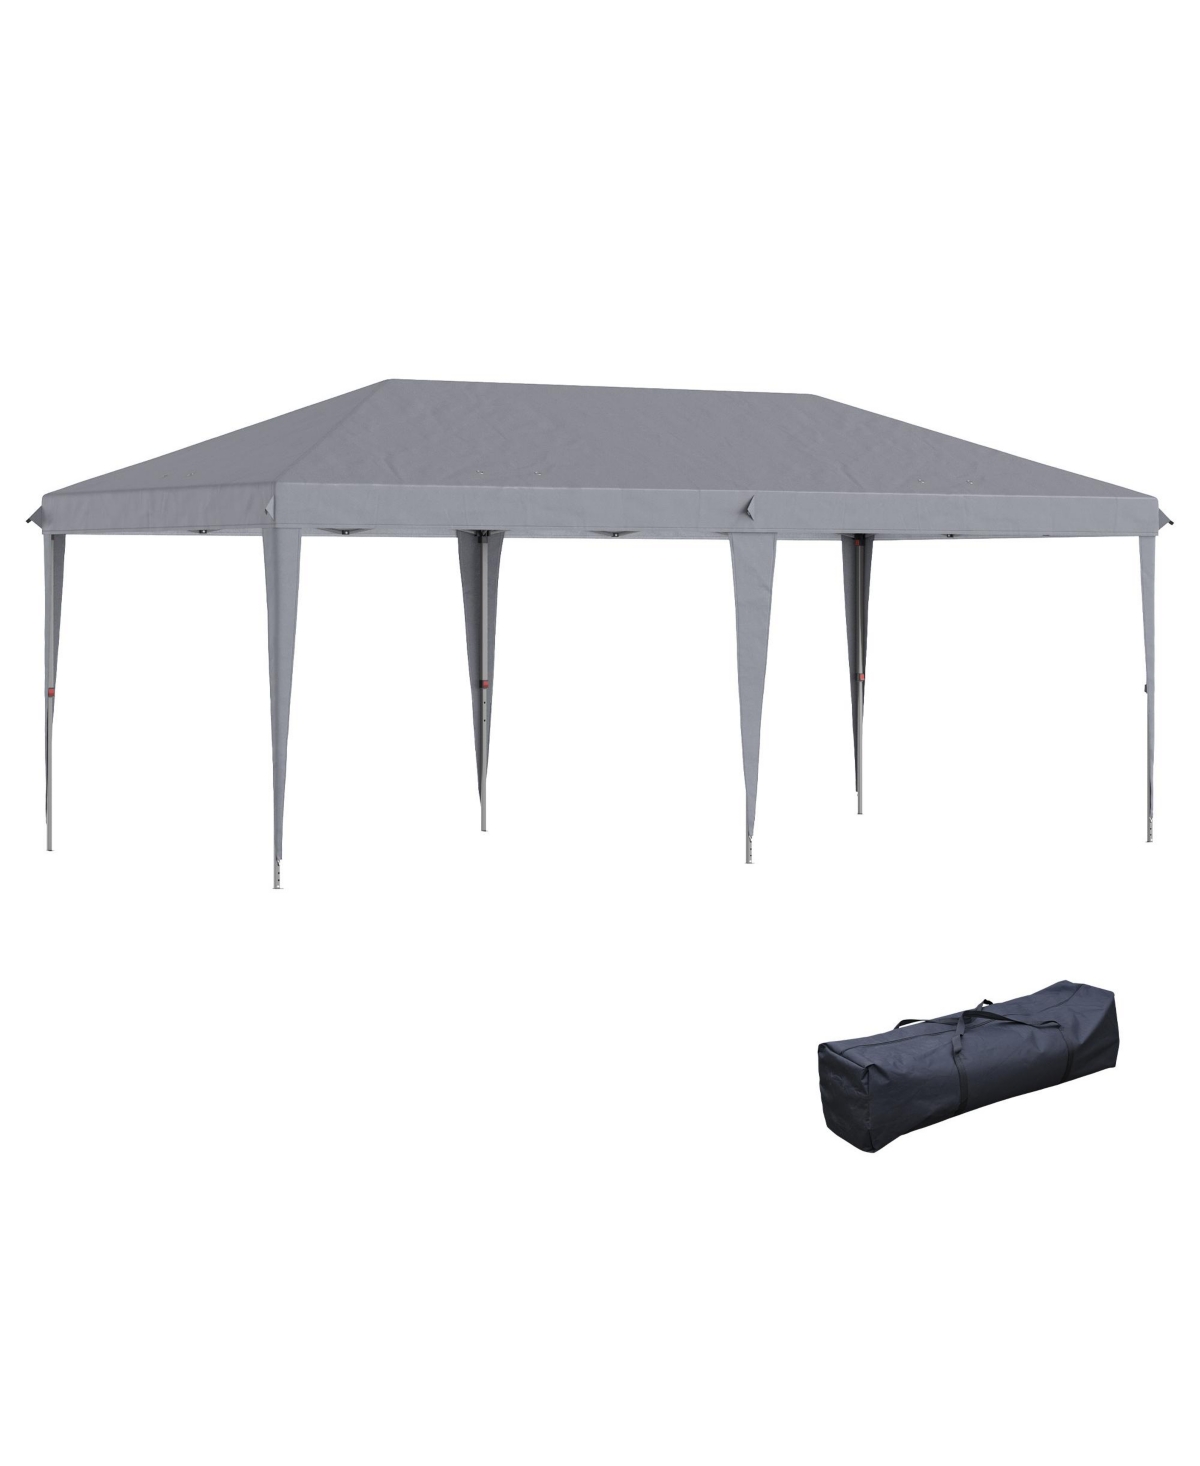 10' x 19' Extra Large Pop Up Canopy, Outdoor Party Tent with Folding Steel Frame, Carrying Bag for Catering, Events, Backyard Bbq, Gray - Gra